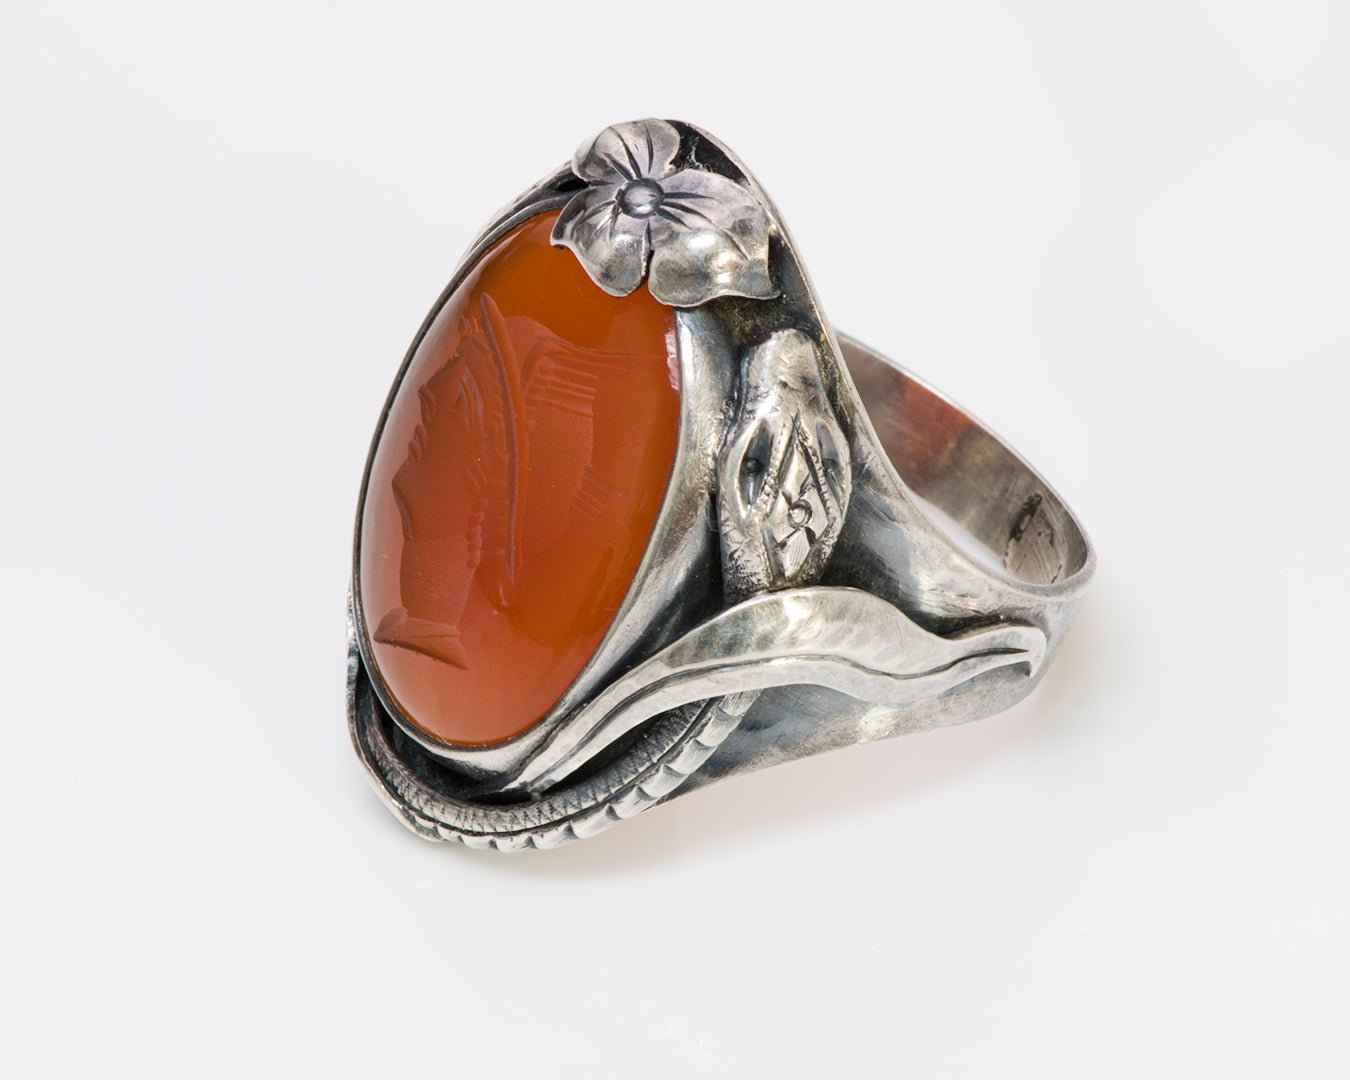 Antique Arts & Crafts Carnelian Intaglio Snake Silver Ring - DSF Antique Jewelry